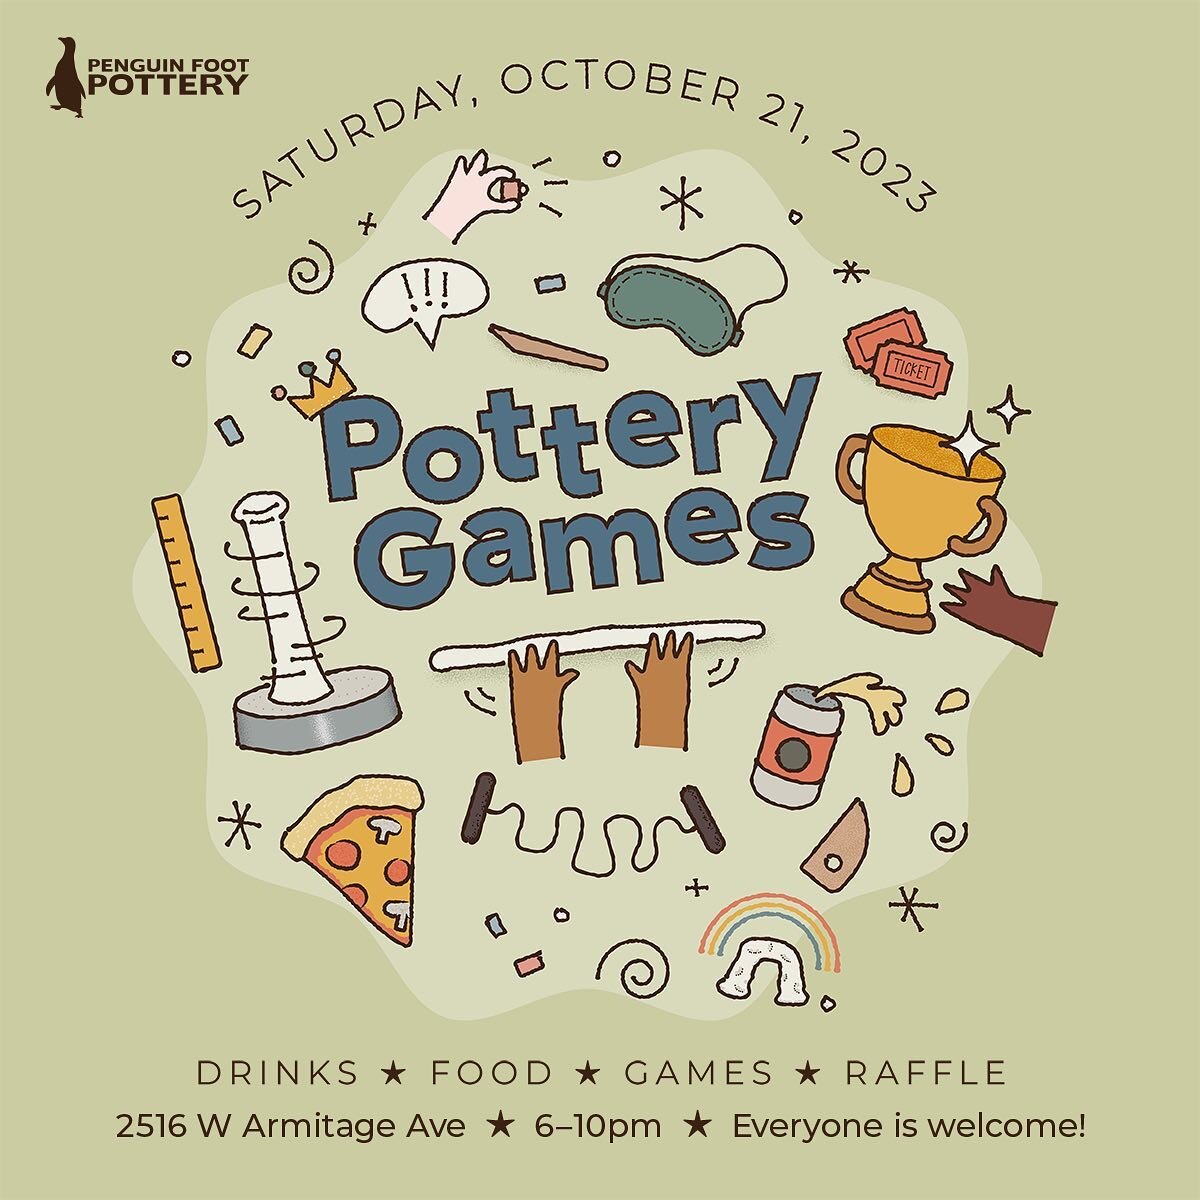 Save the date! Our annual Pottery Games party will be on Saturday, Oct 21st. This is the event you have been training for all year. 🏆

Poster design by the talented @andiharman 🤩